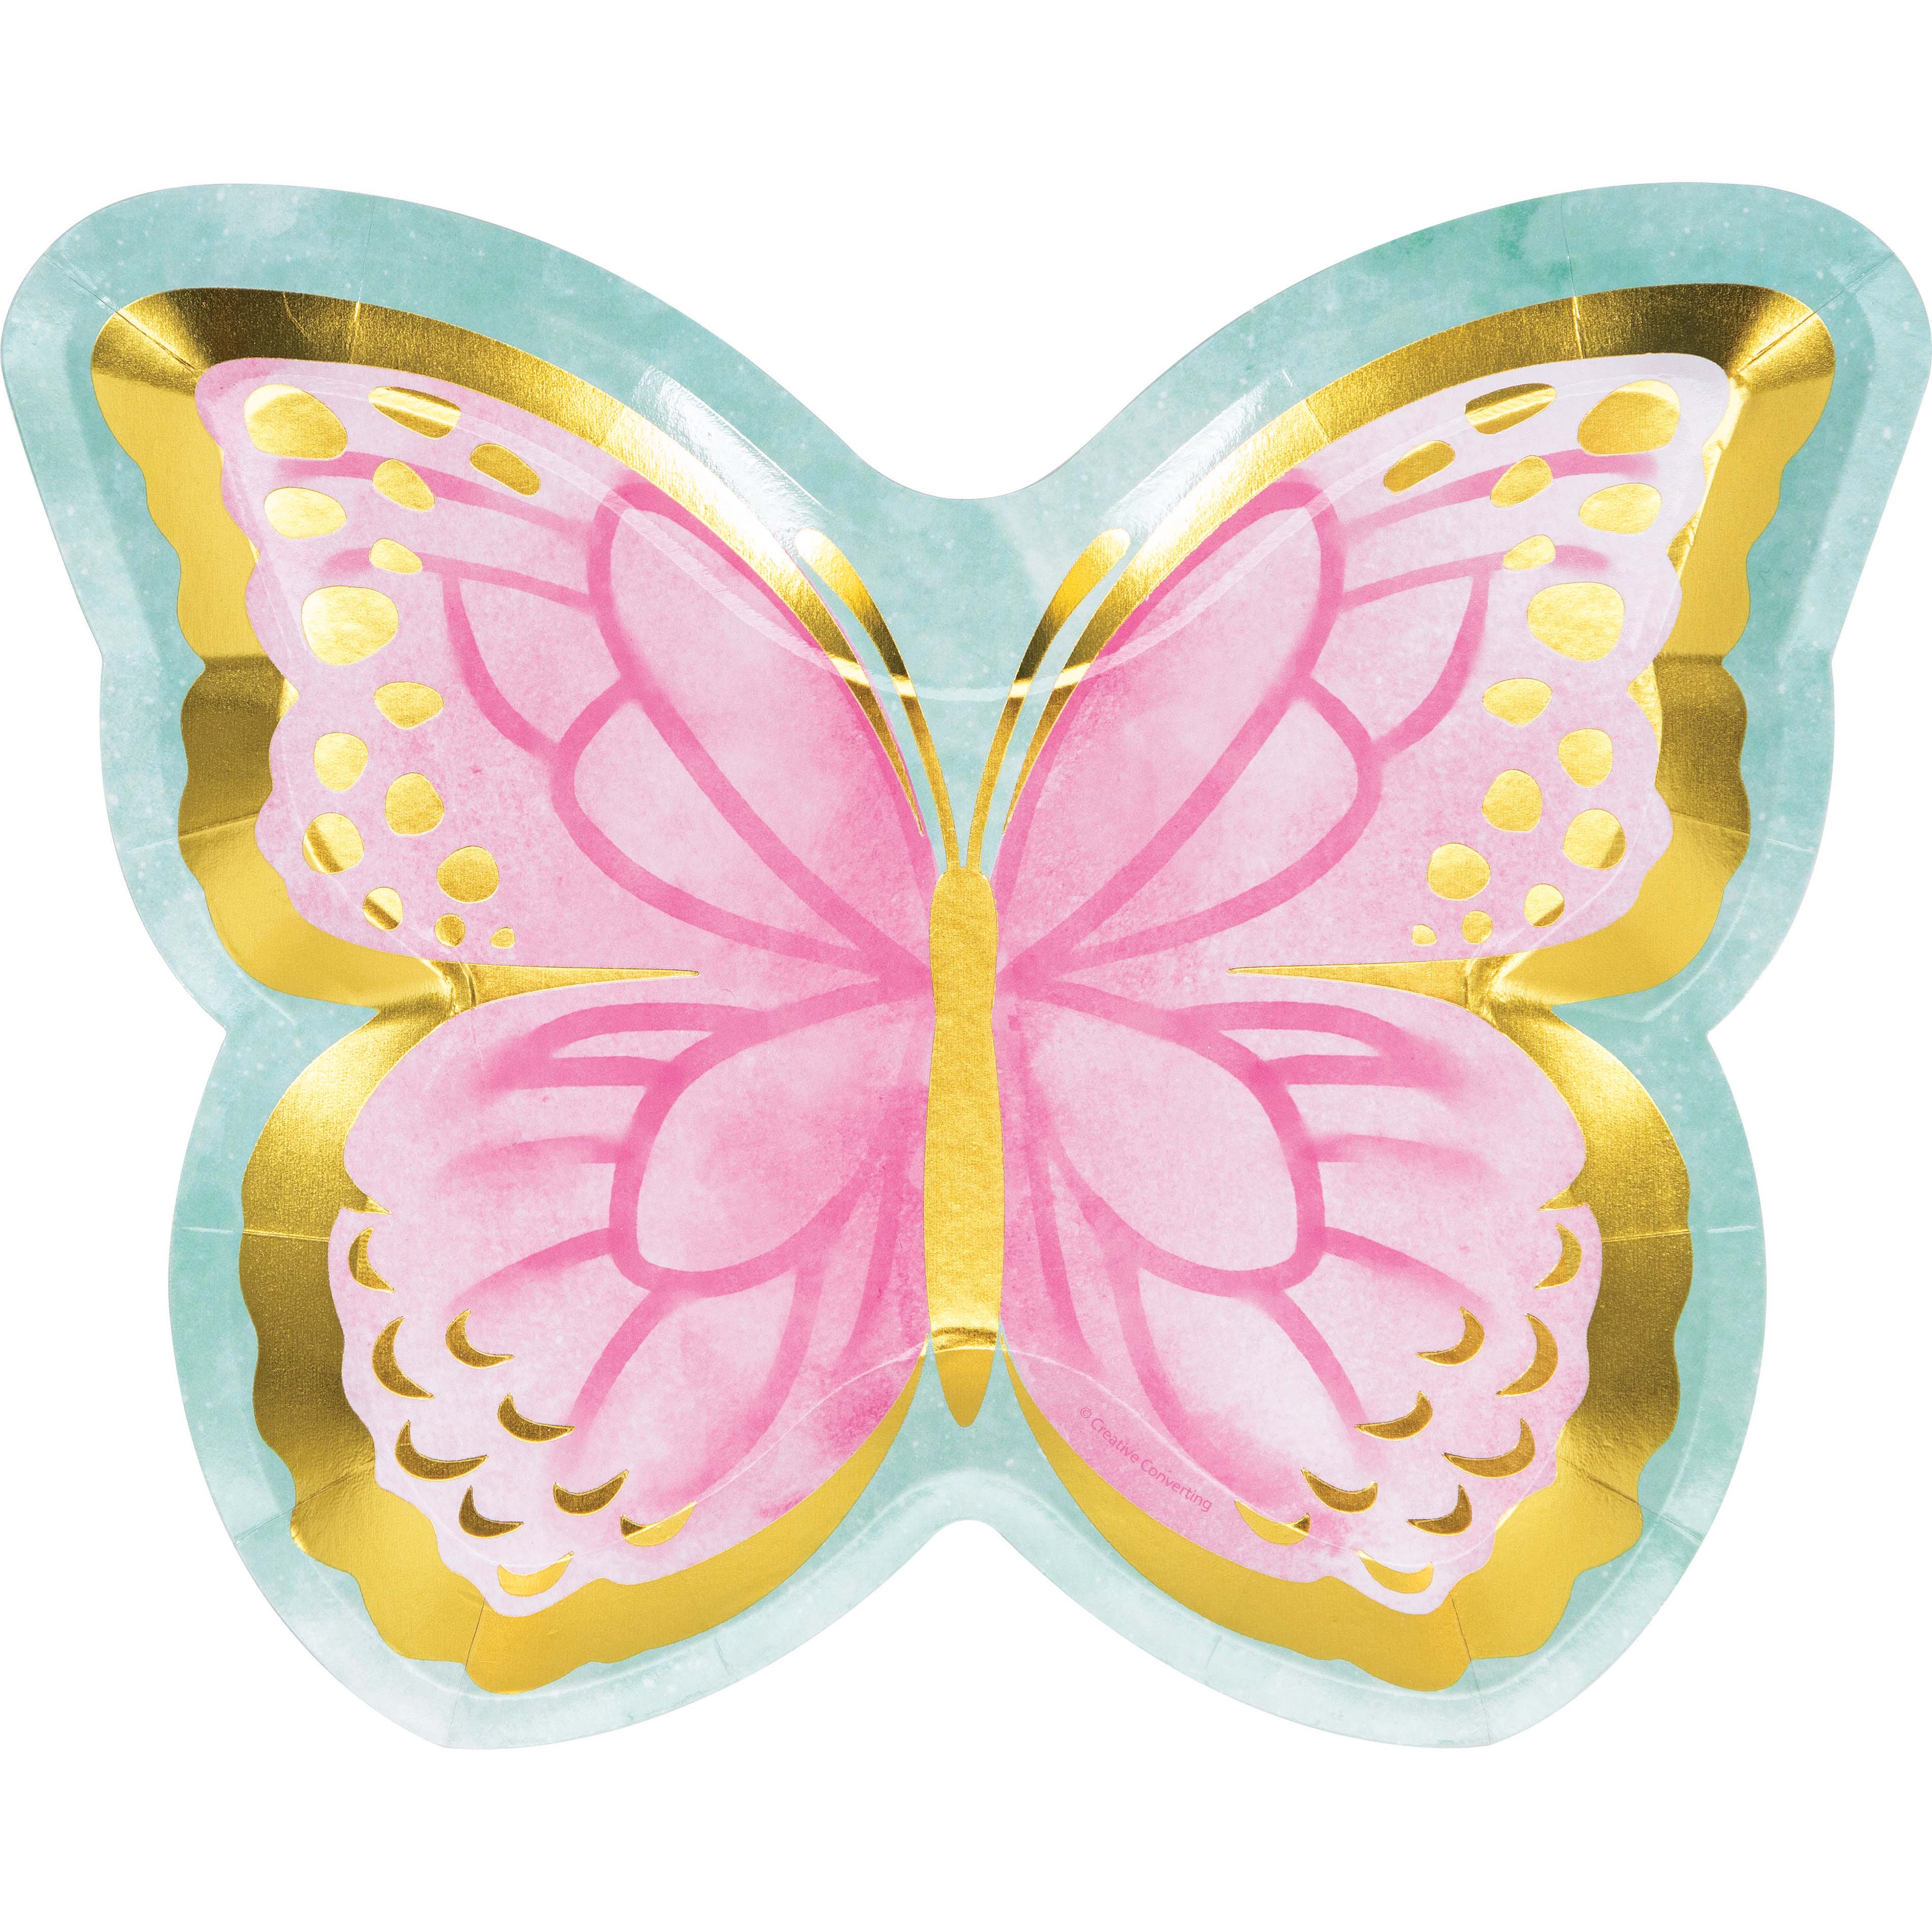 Butterfly-shaped paper plate 8 pcs